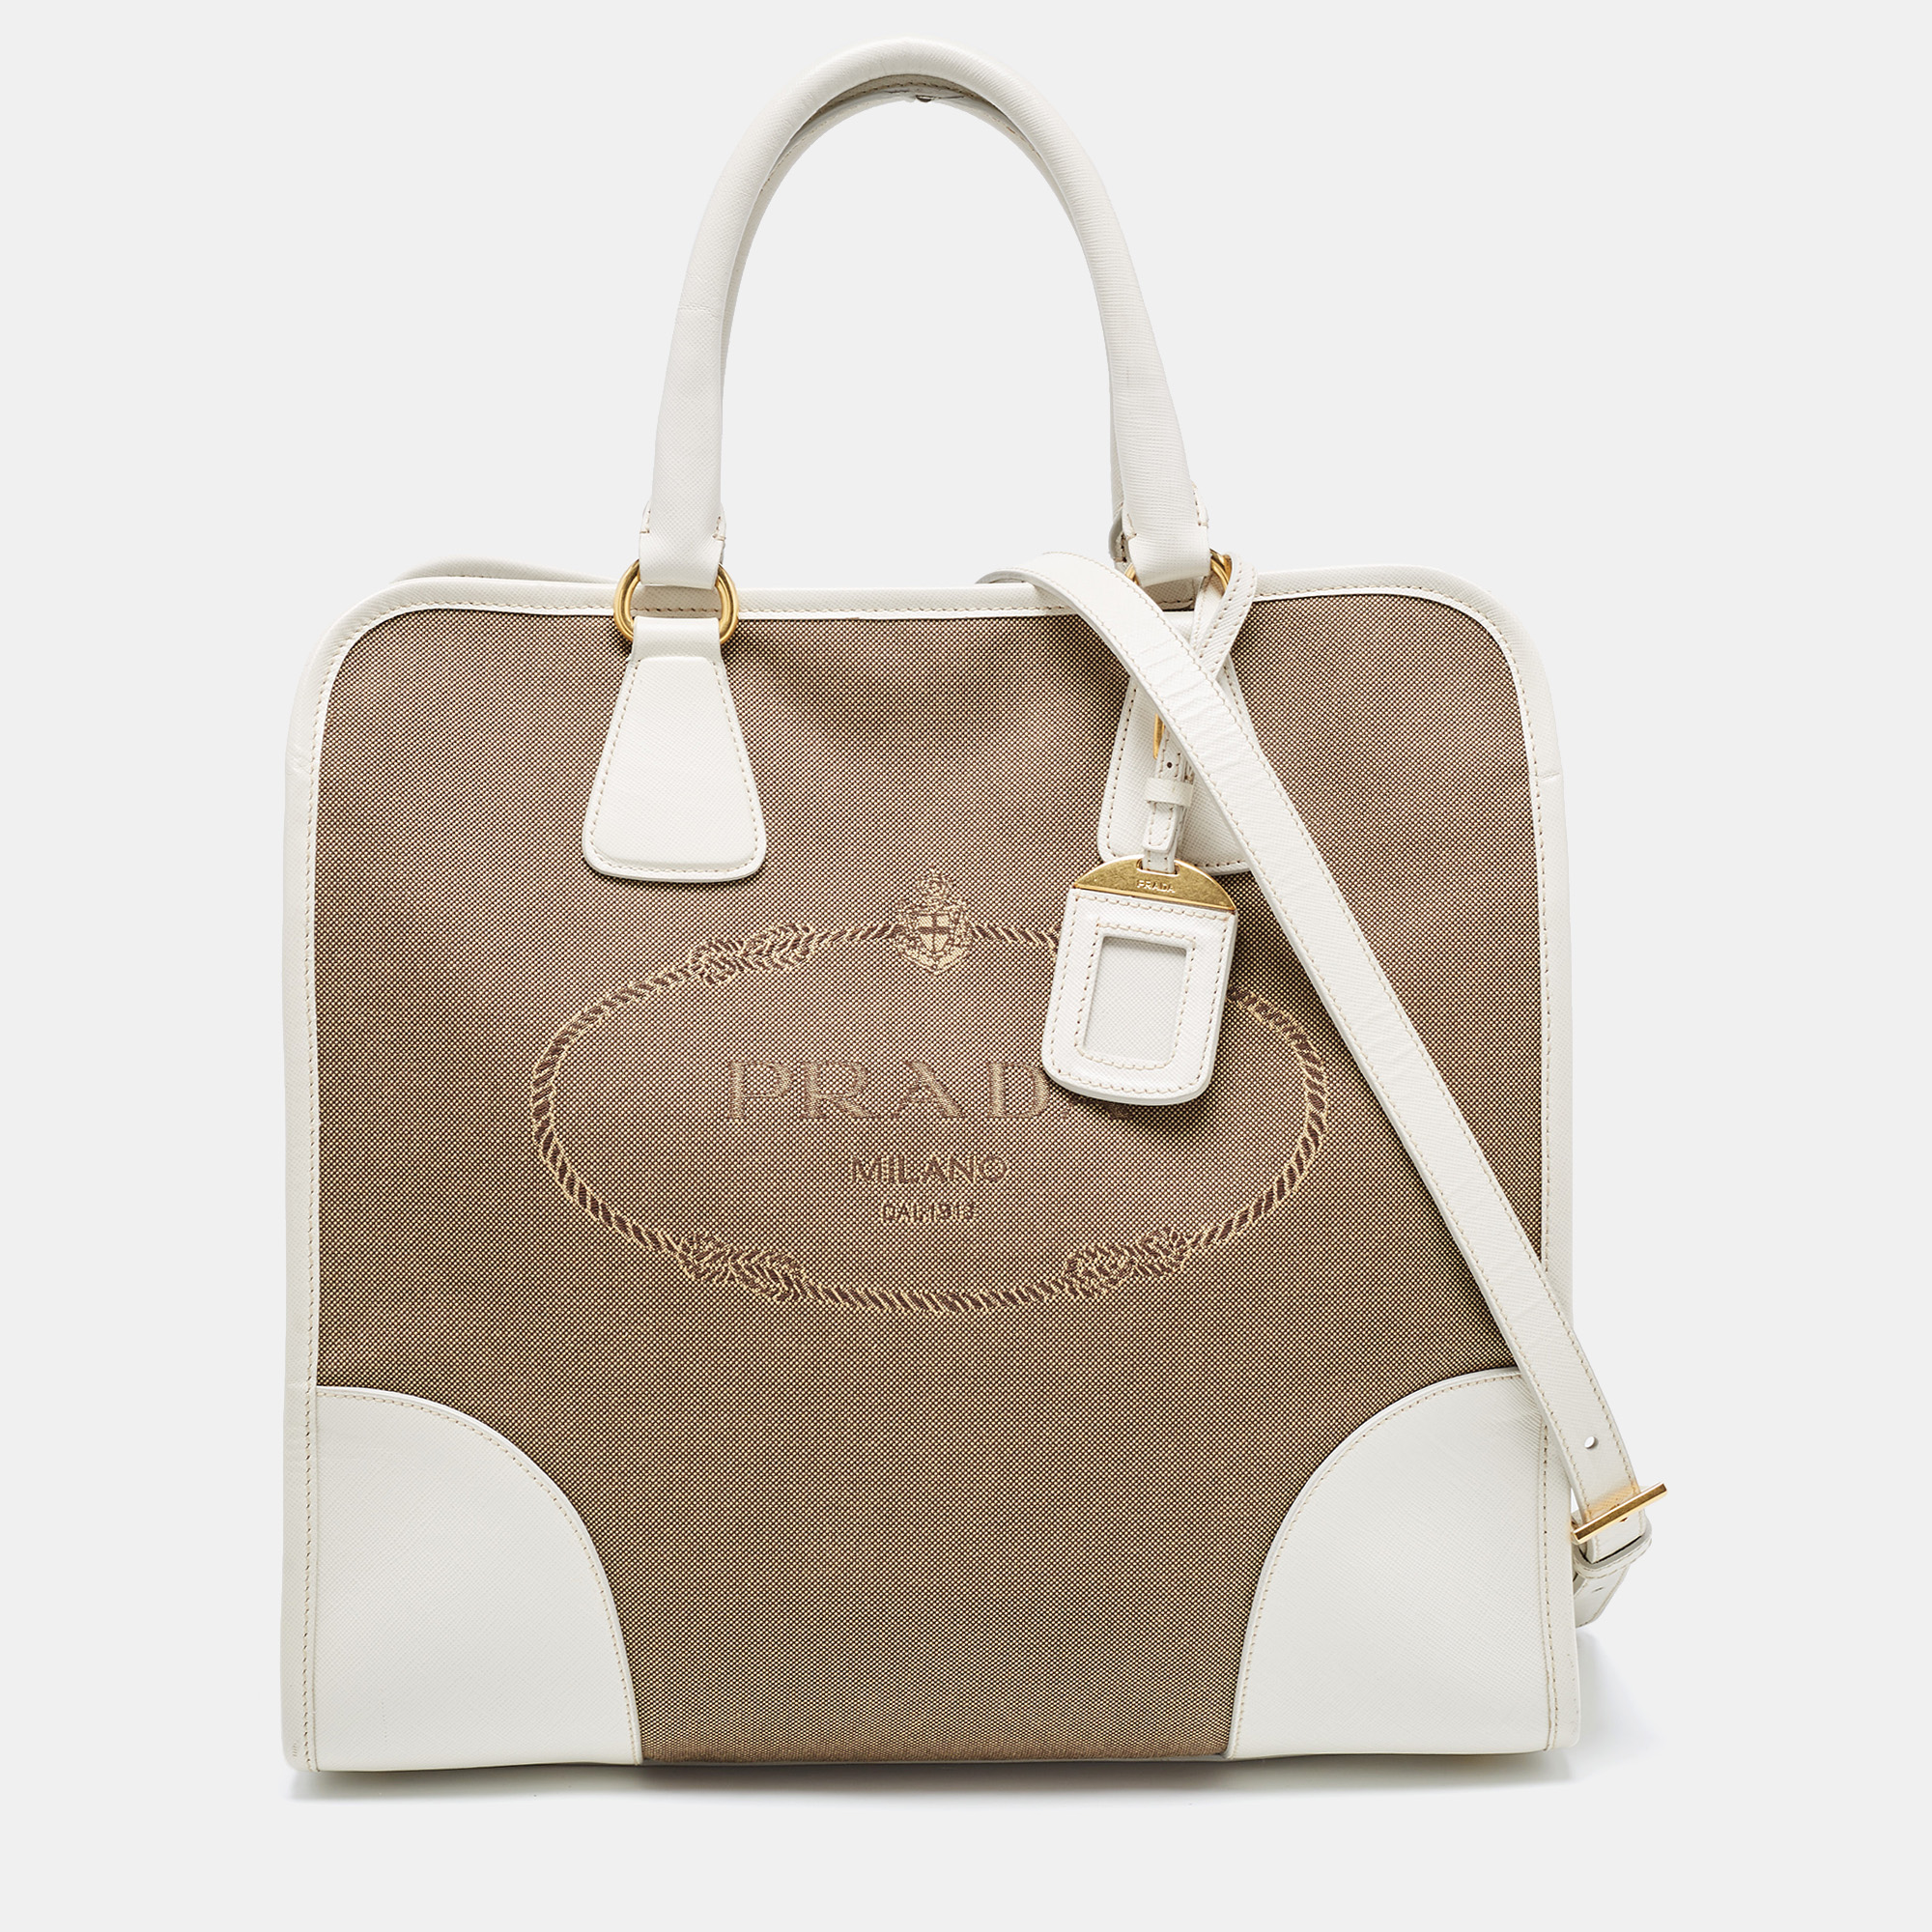 The simple silhouette and the use of durable materials for the exterior bring out the appeal of this designer tote for women. It features comfortable handles and a well lined interior.